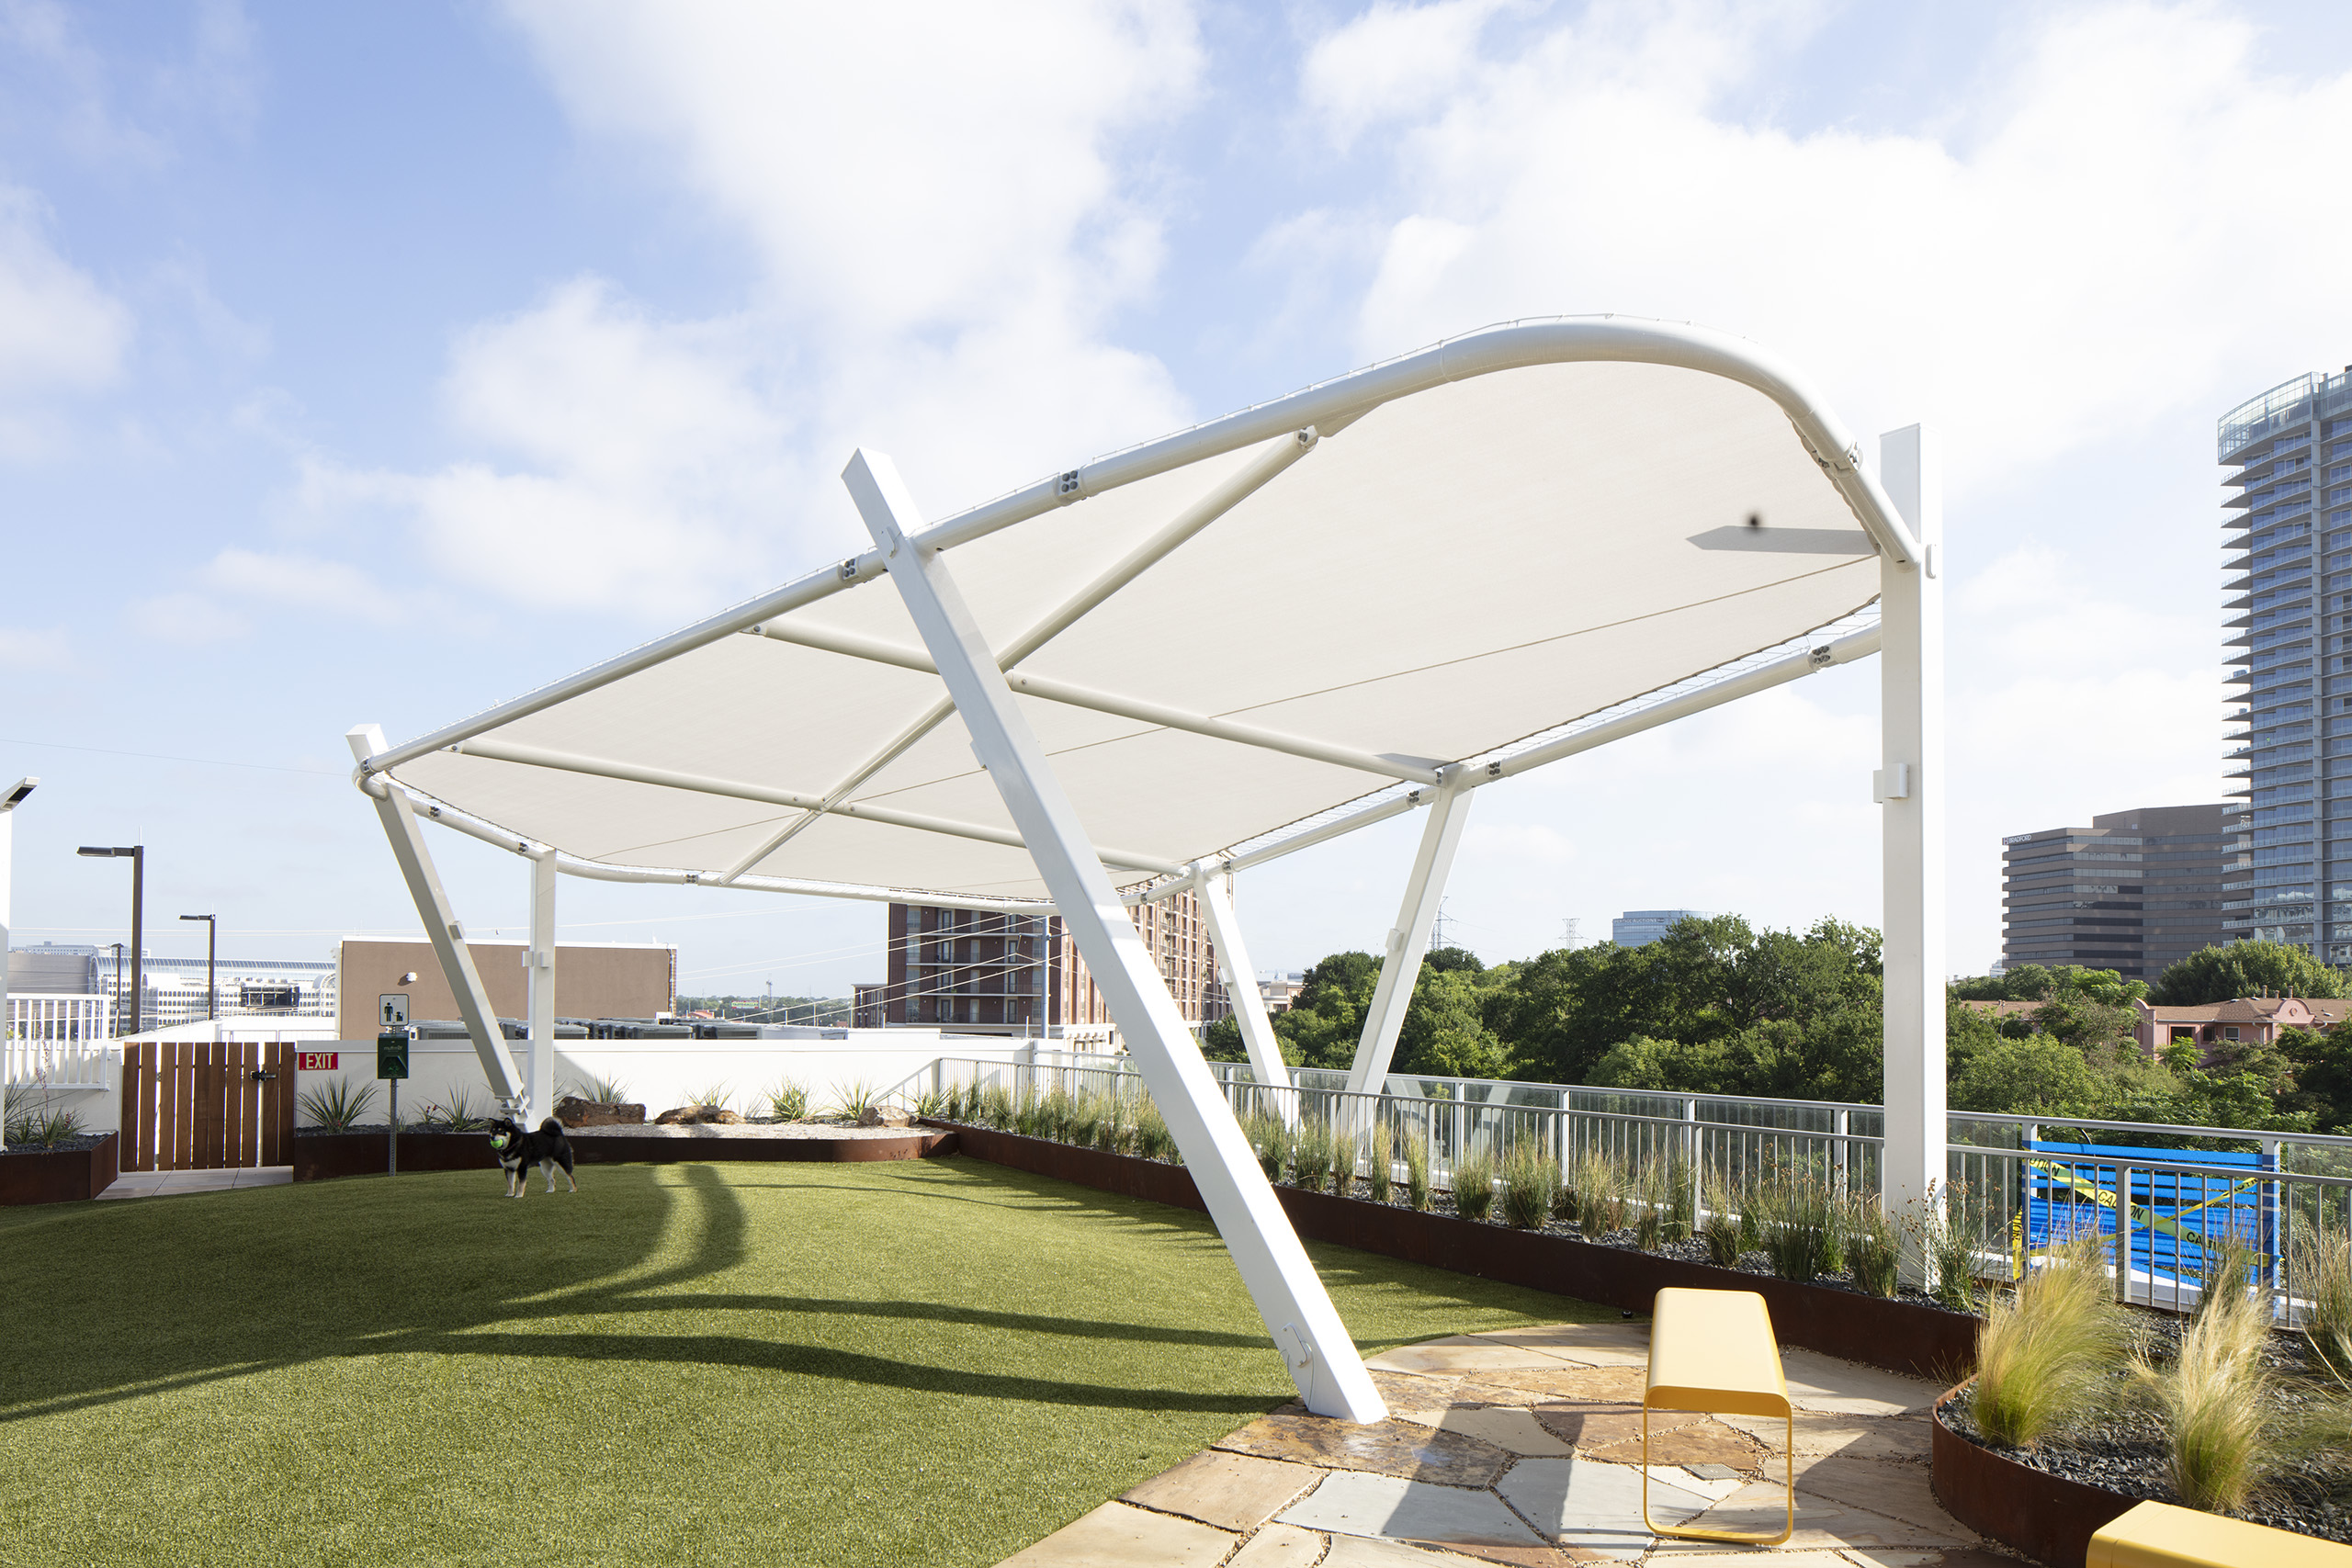 shade structure on roof protecting katy station dog park